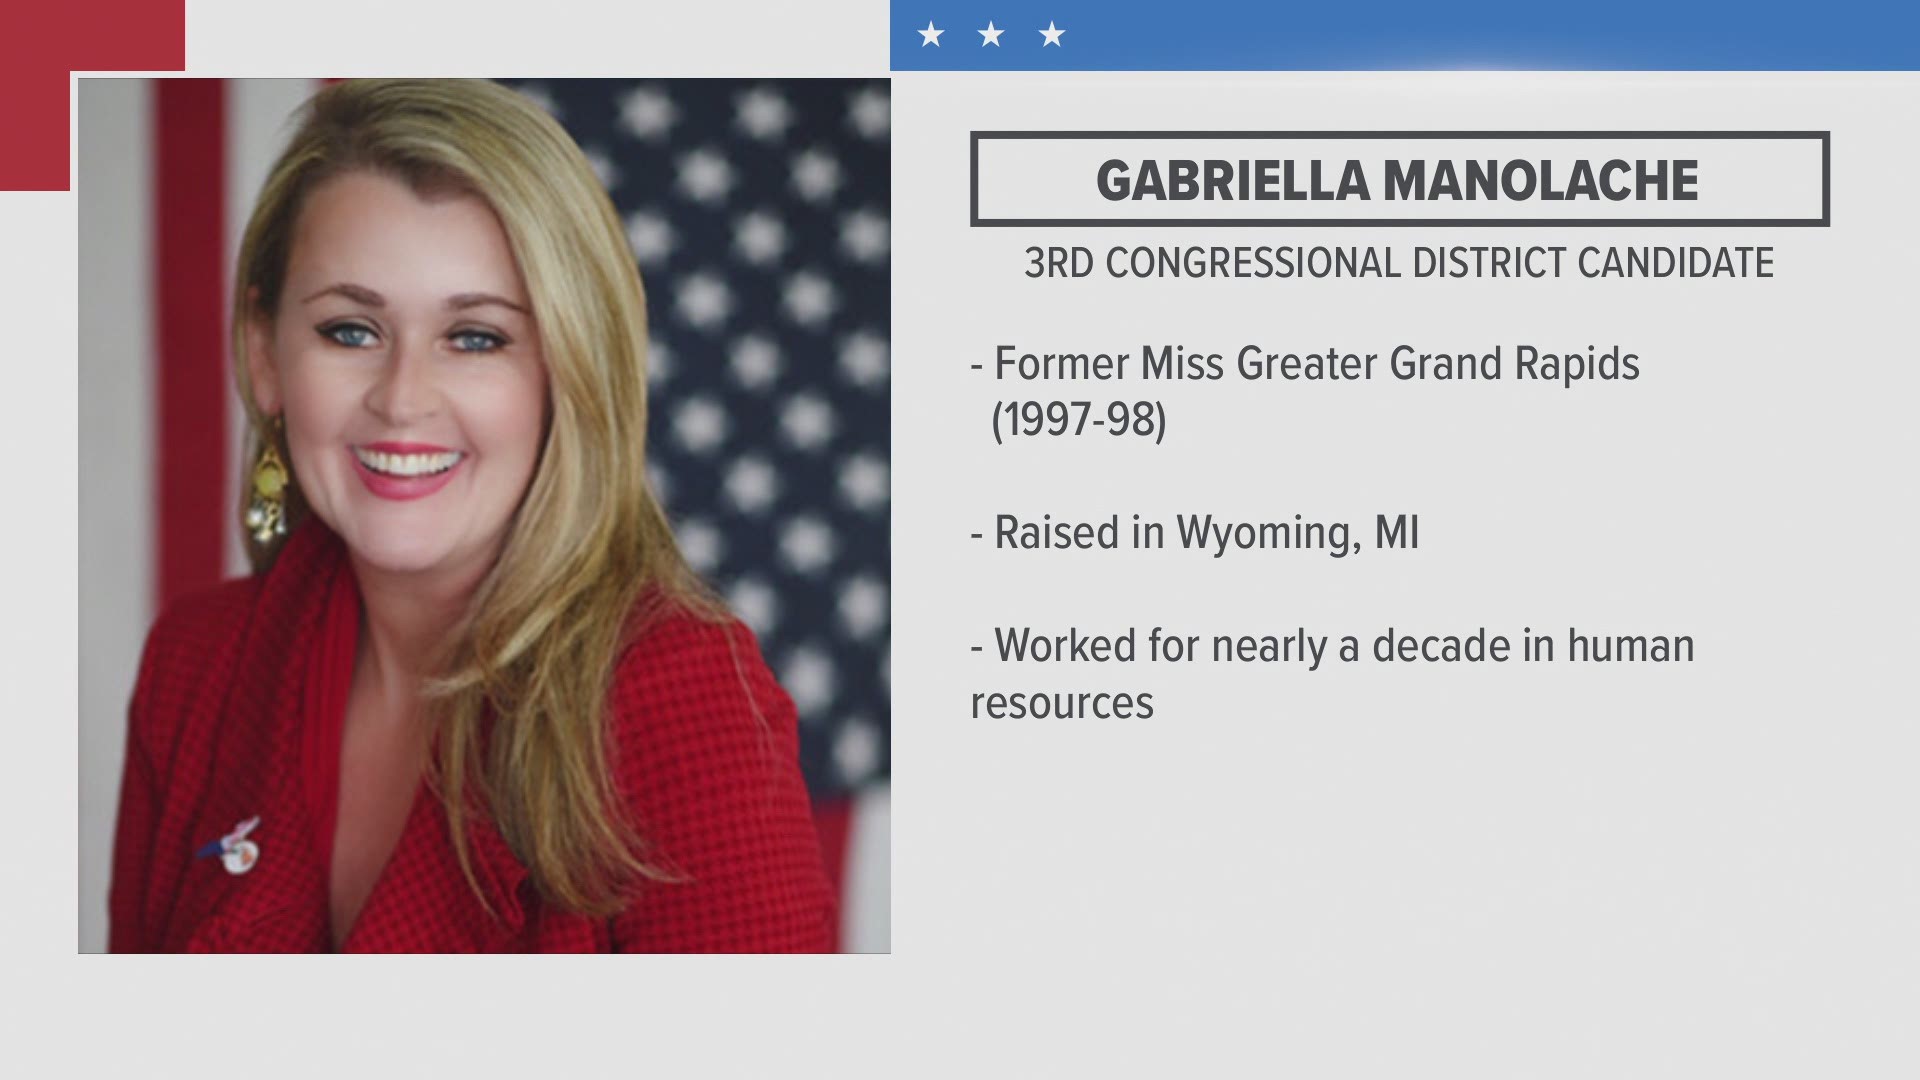 Gabriella Manolache is an attorney and a former Miss Greater Grand Rapids.